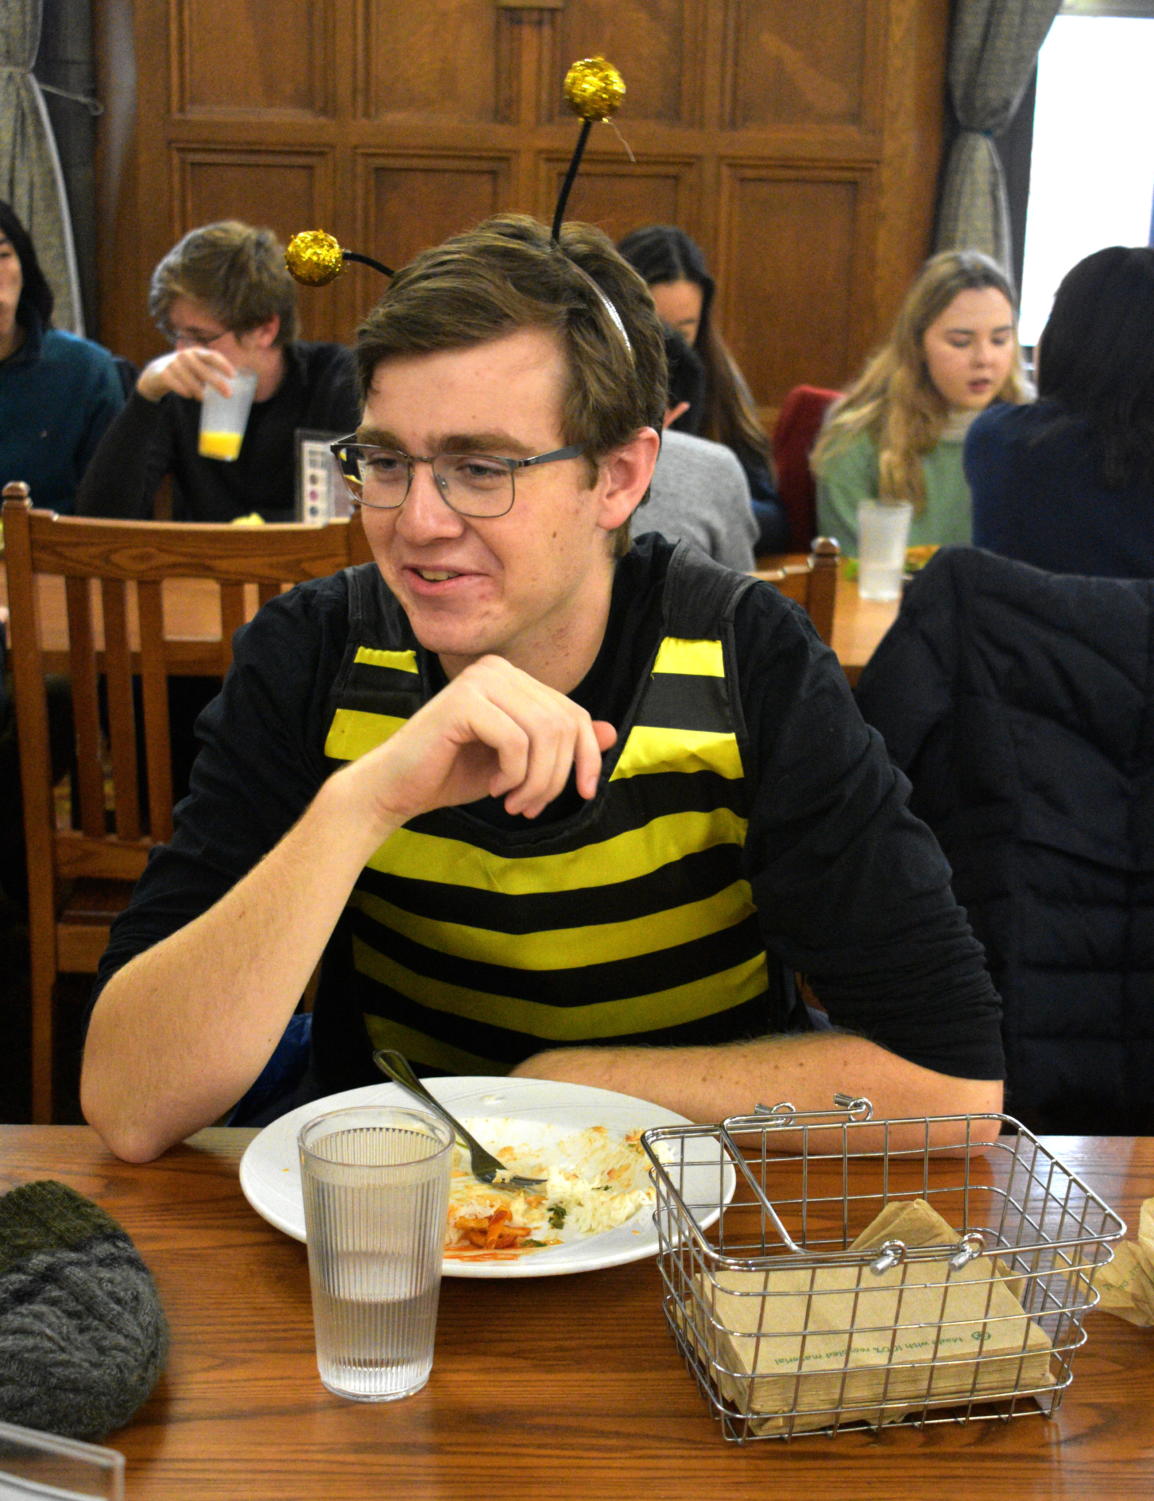 A student dressed as a bumble-bee at the Cathey Dining Commons.